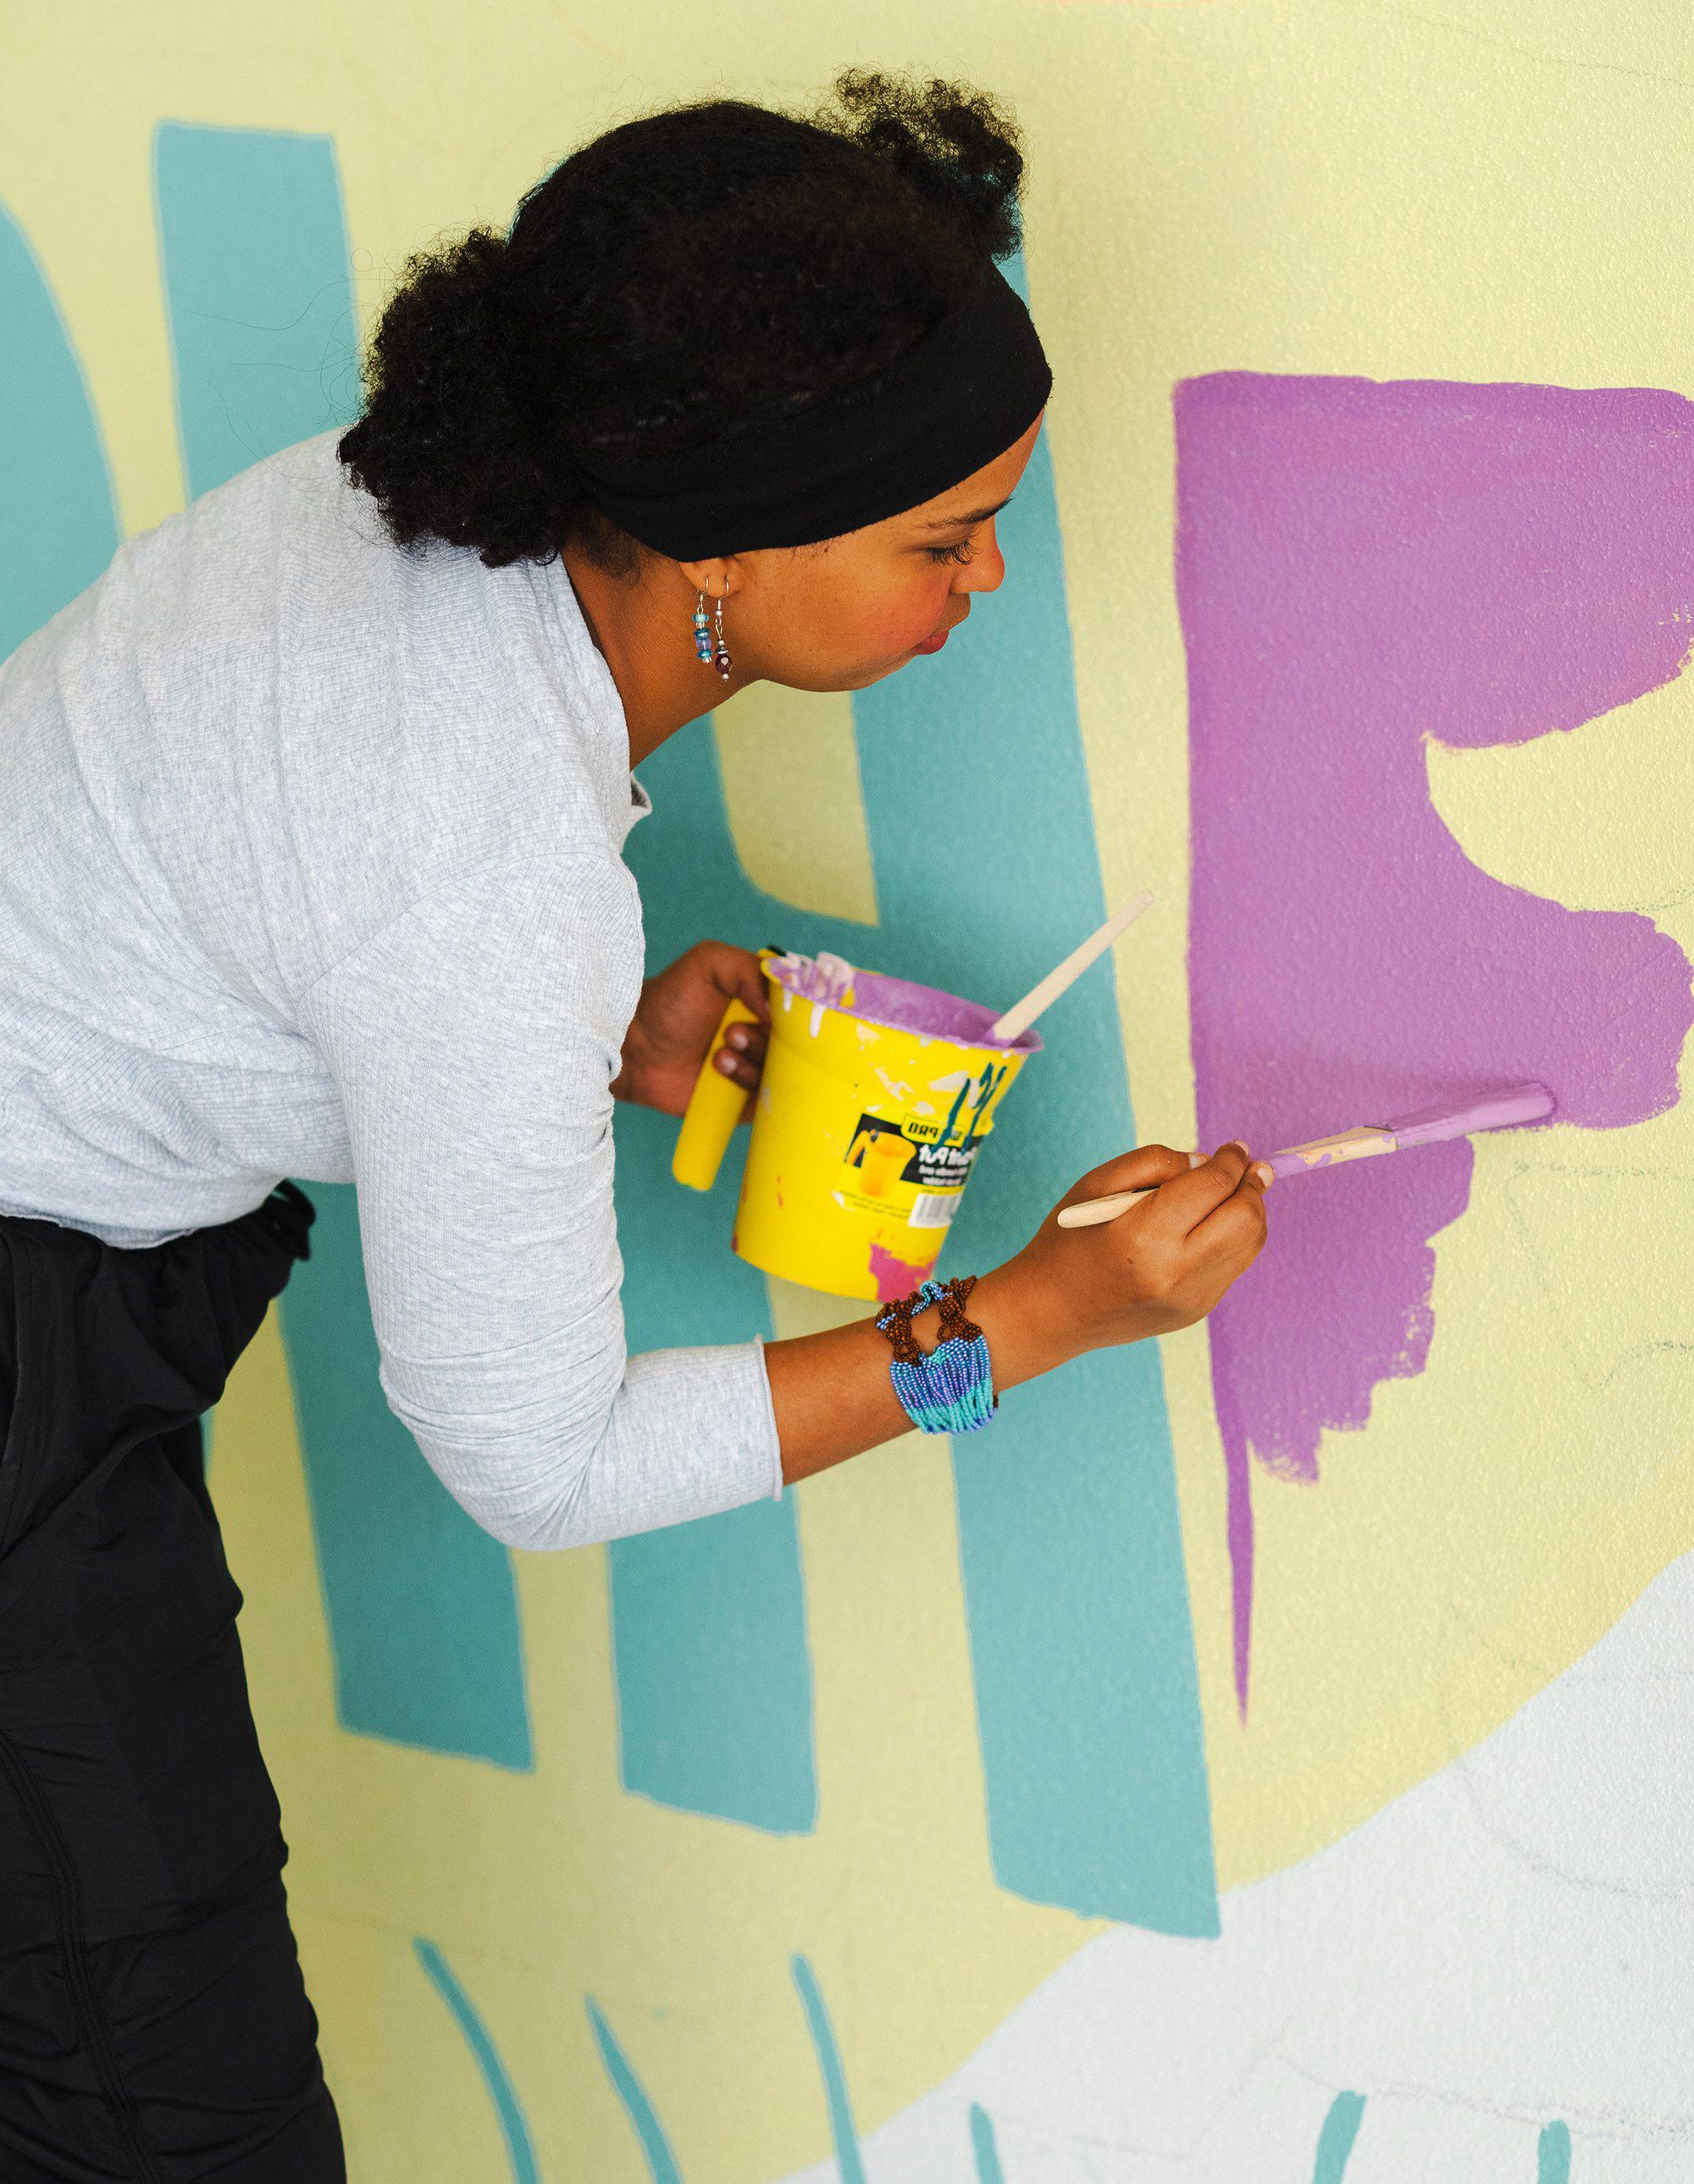 One of the Foyer residents paints the mural